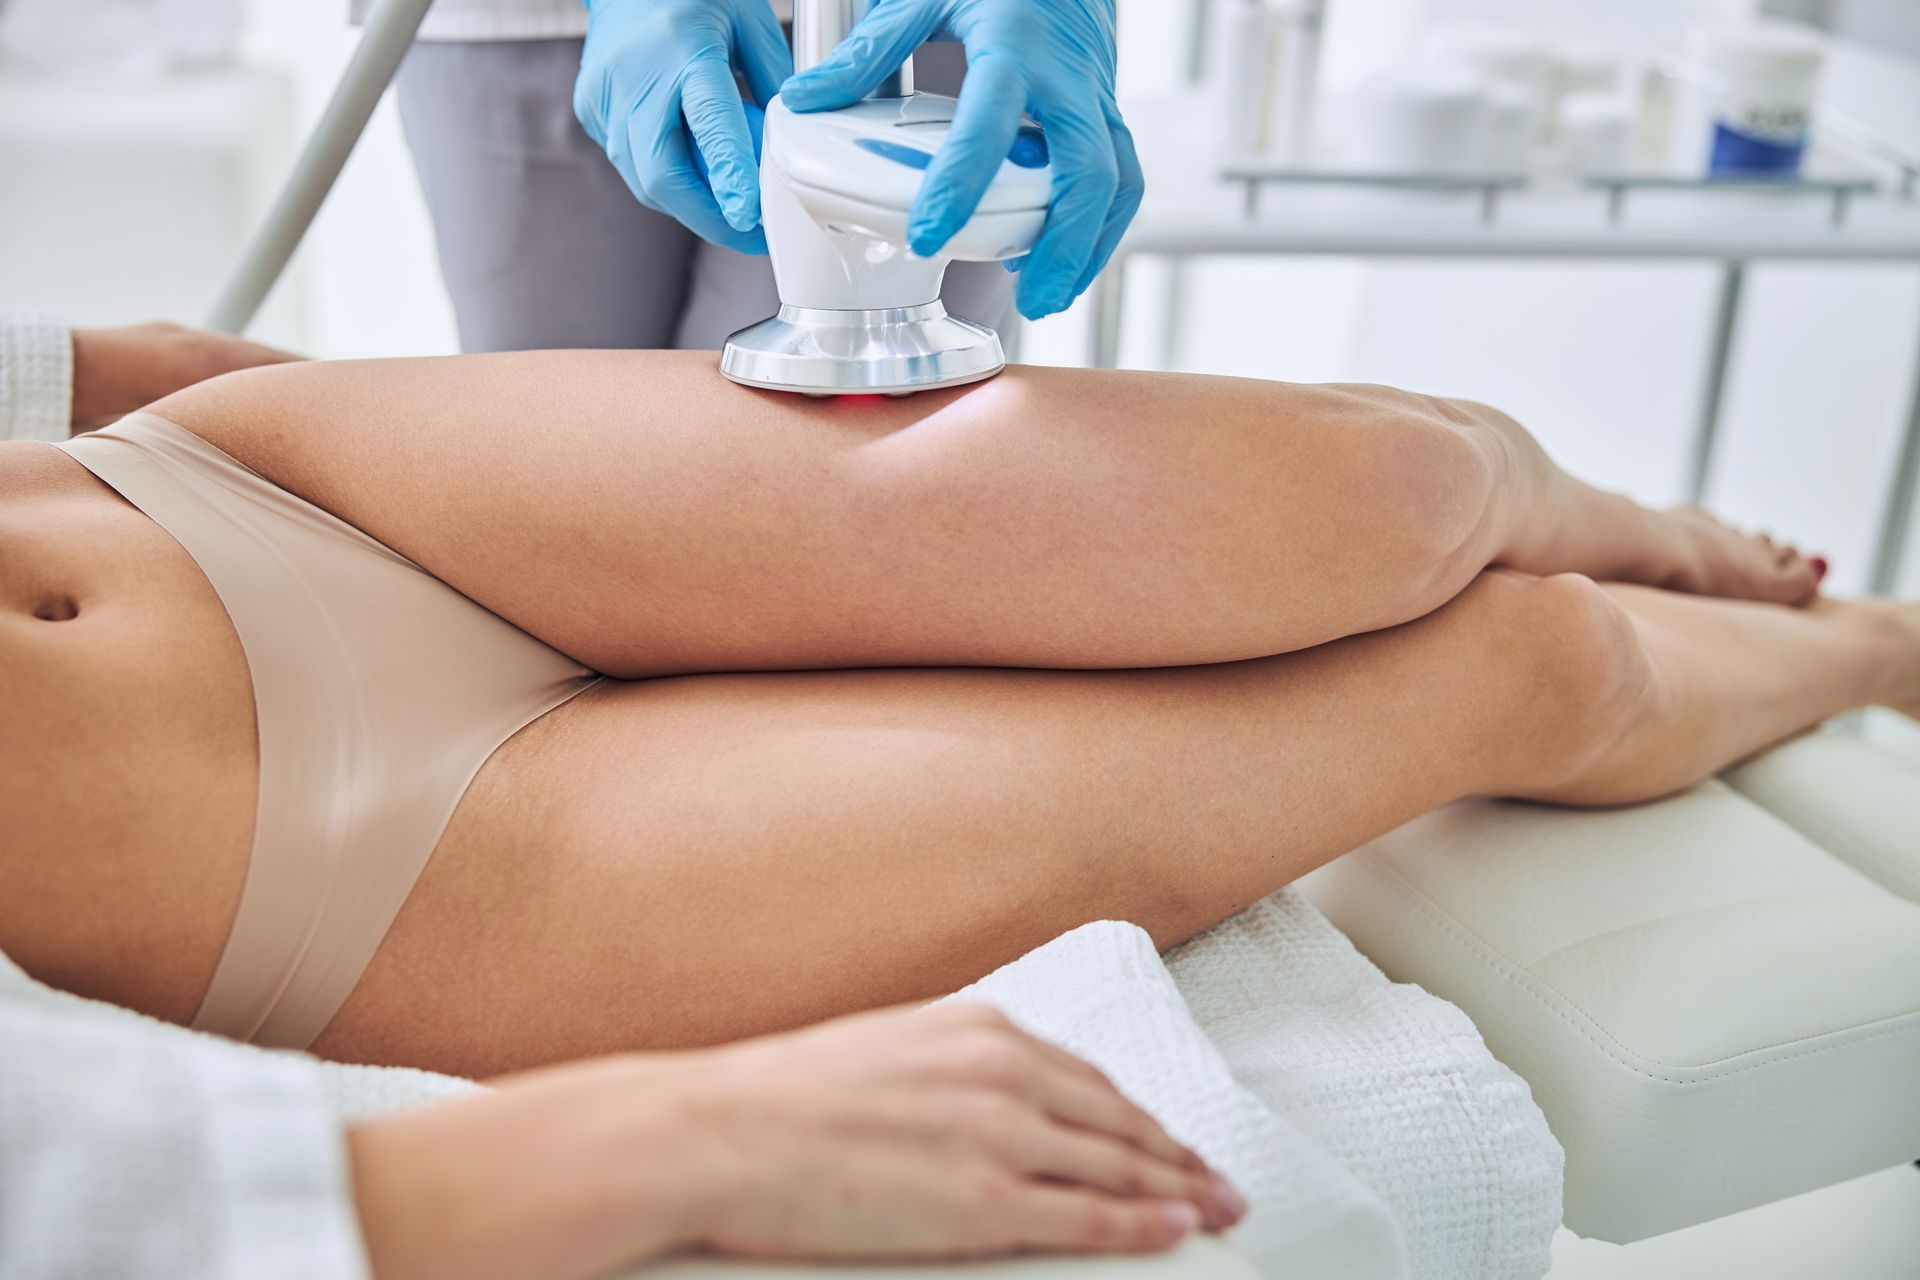 A woman is getting a cavitation treatment on her legs.